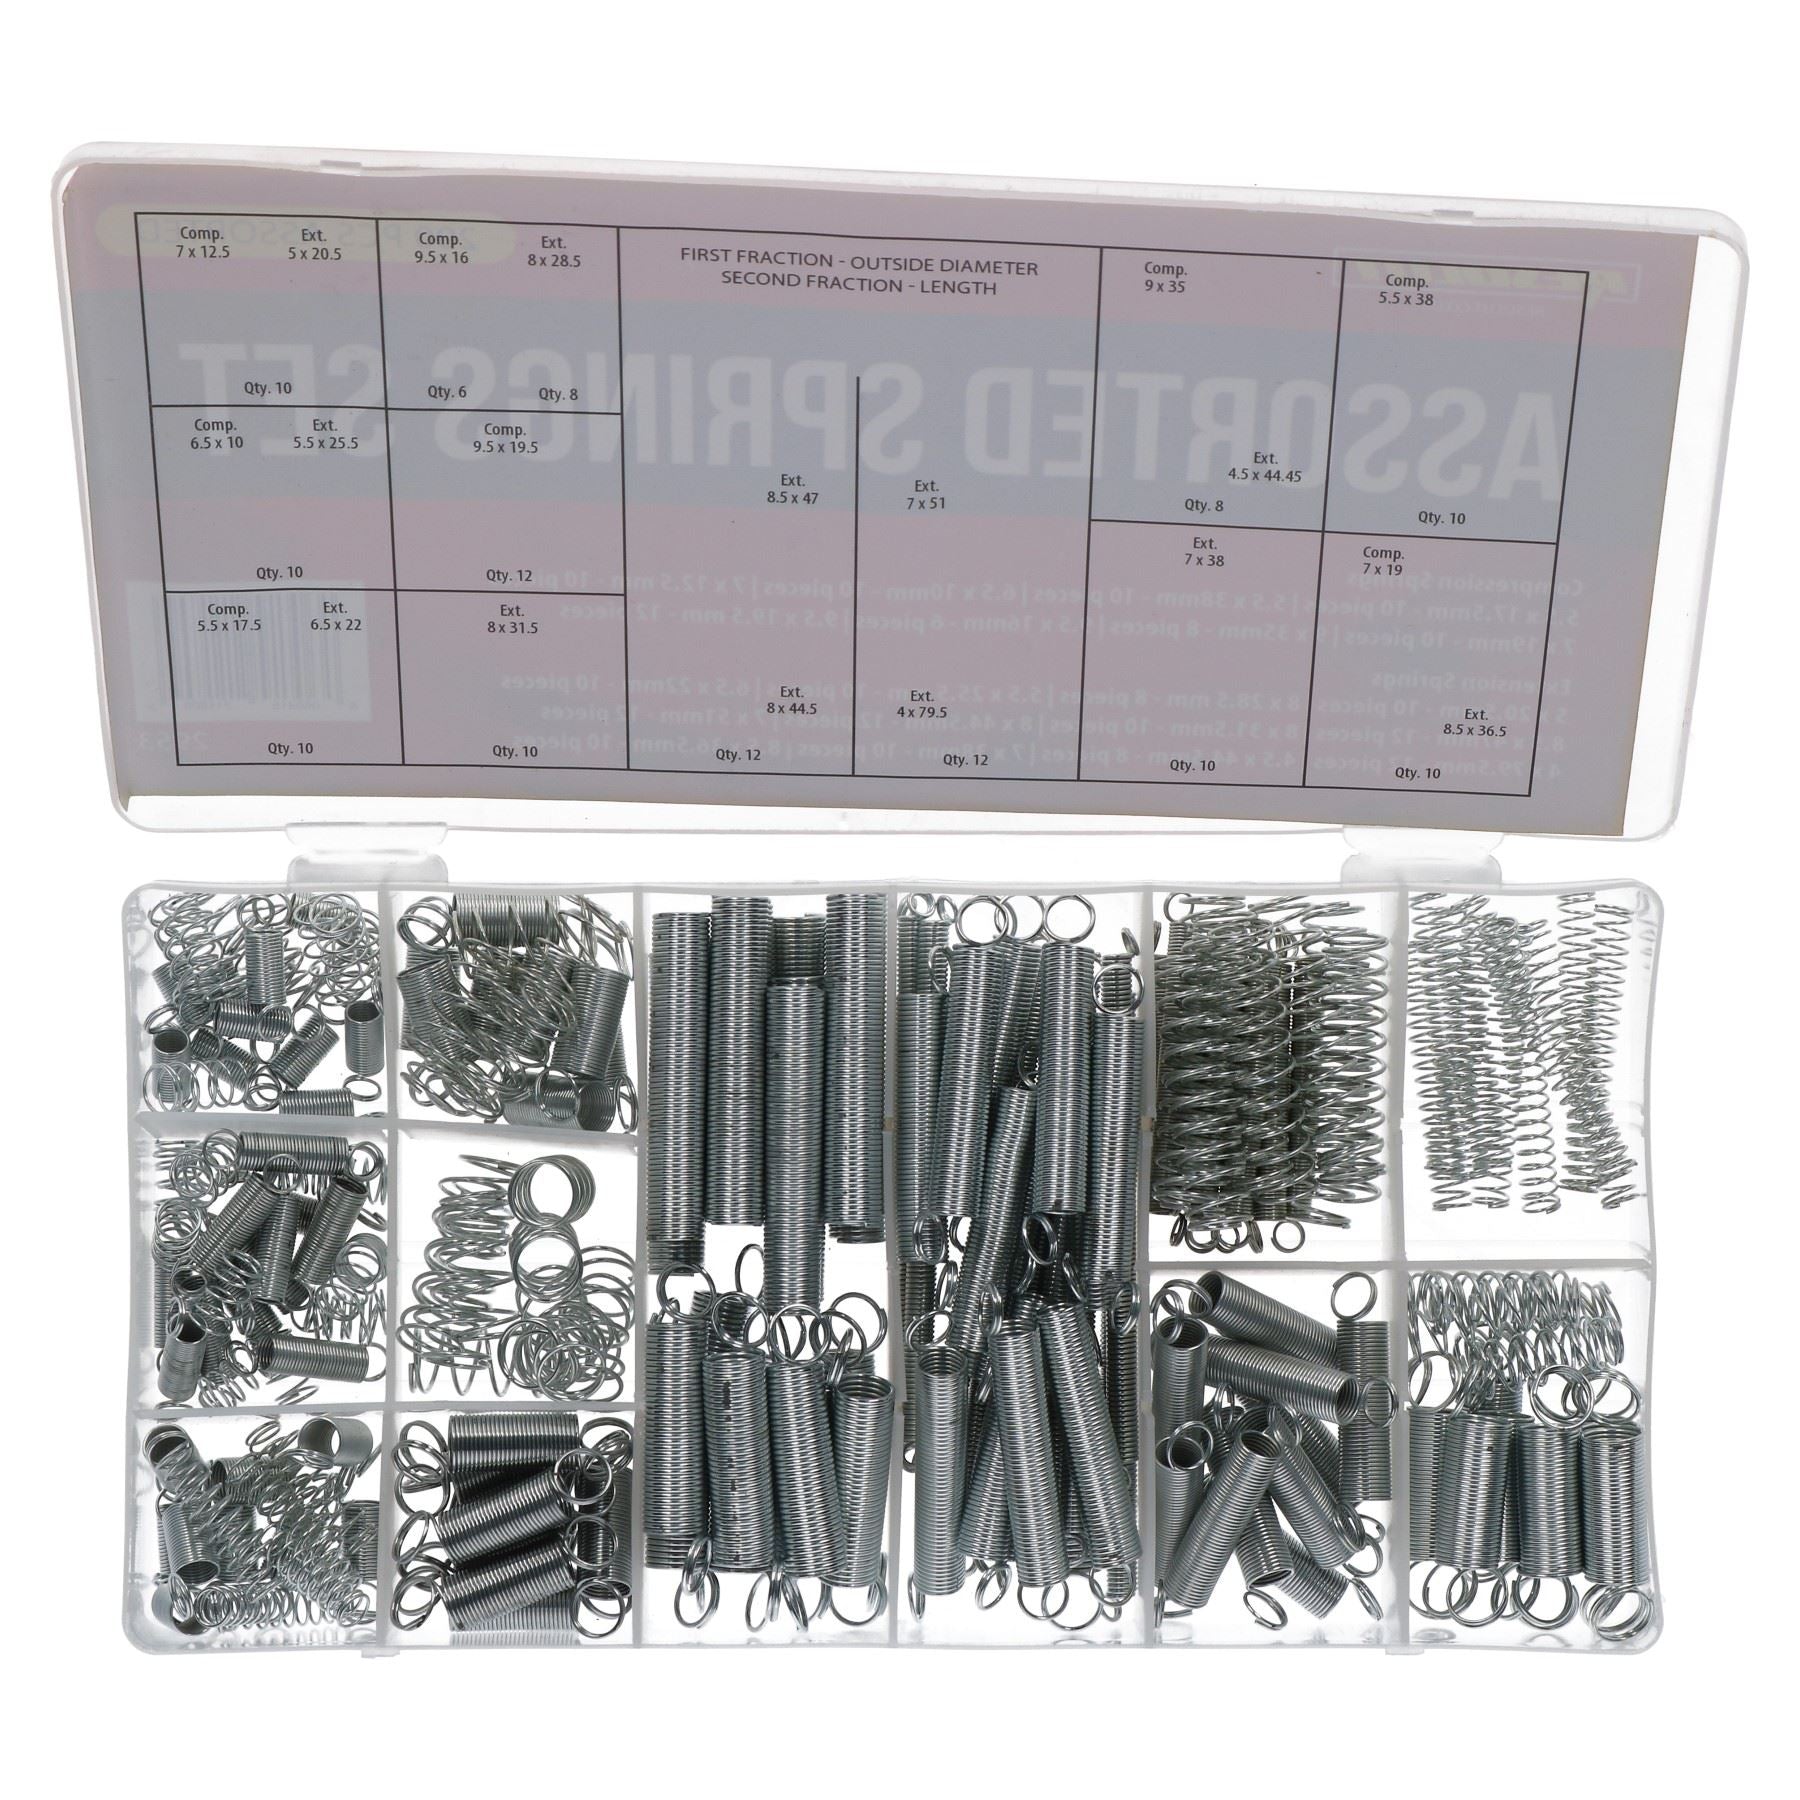 Assorted Spring Set Compression and Extension Tension Springs 200pc